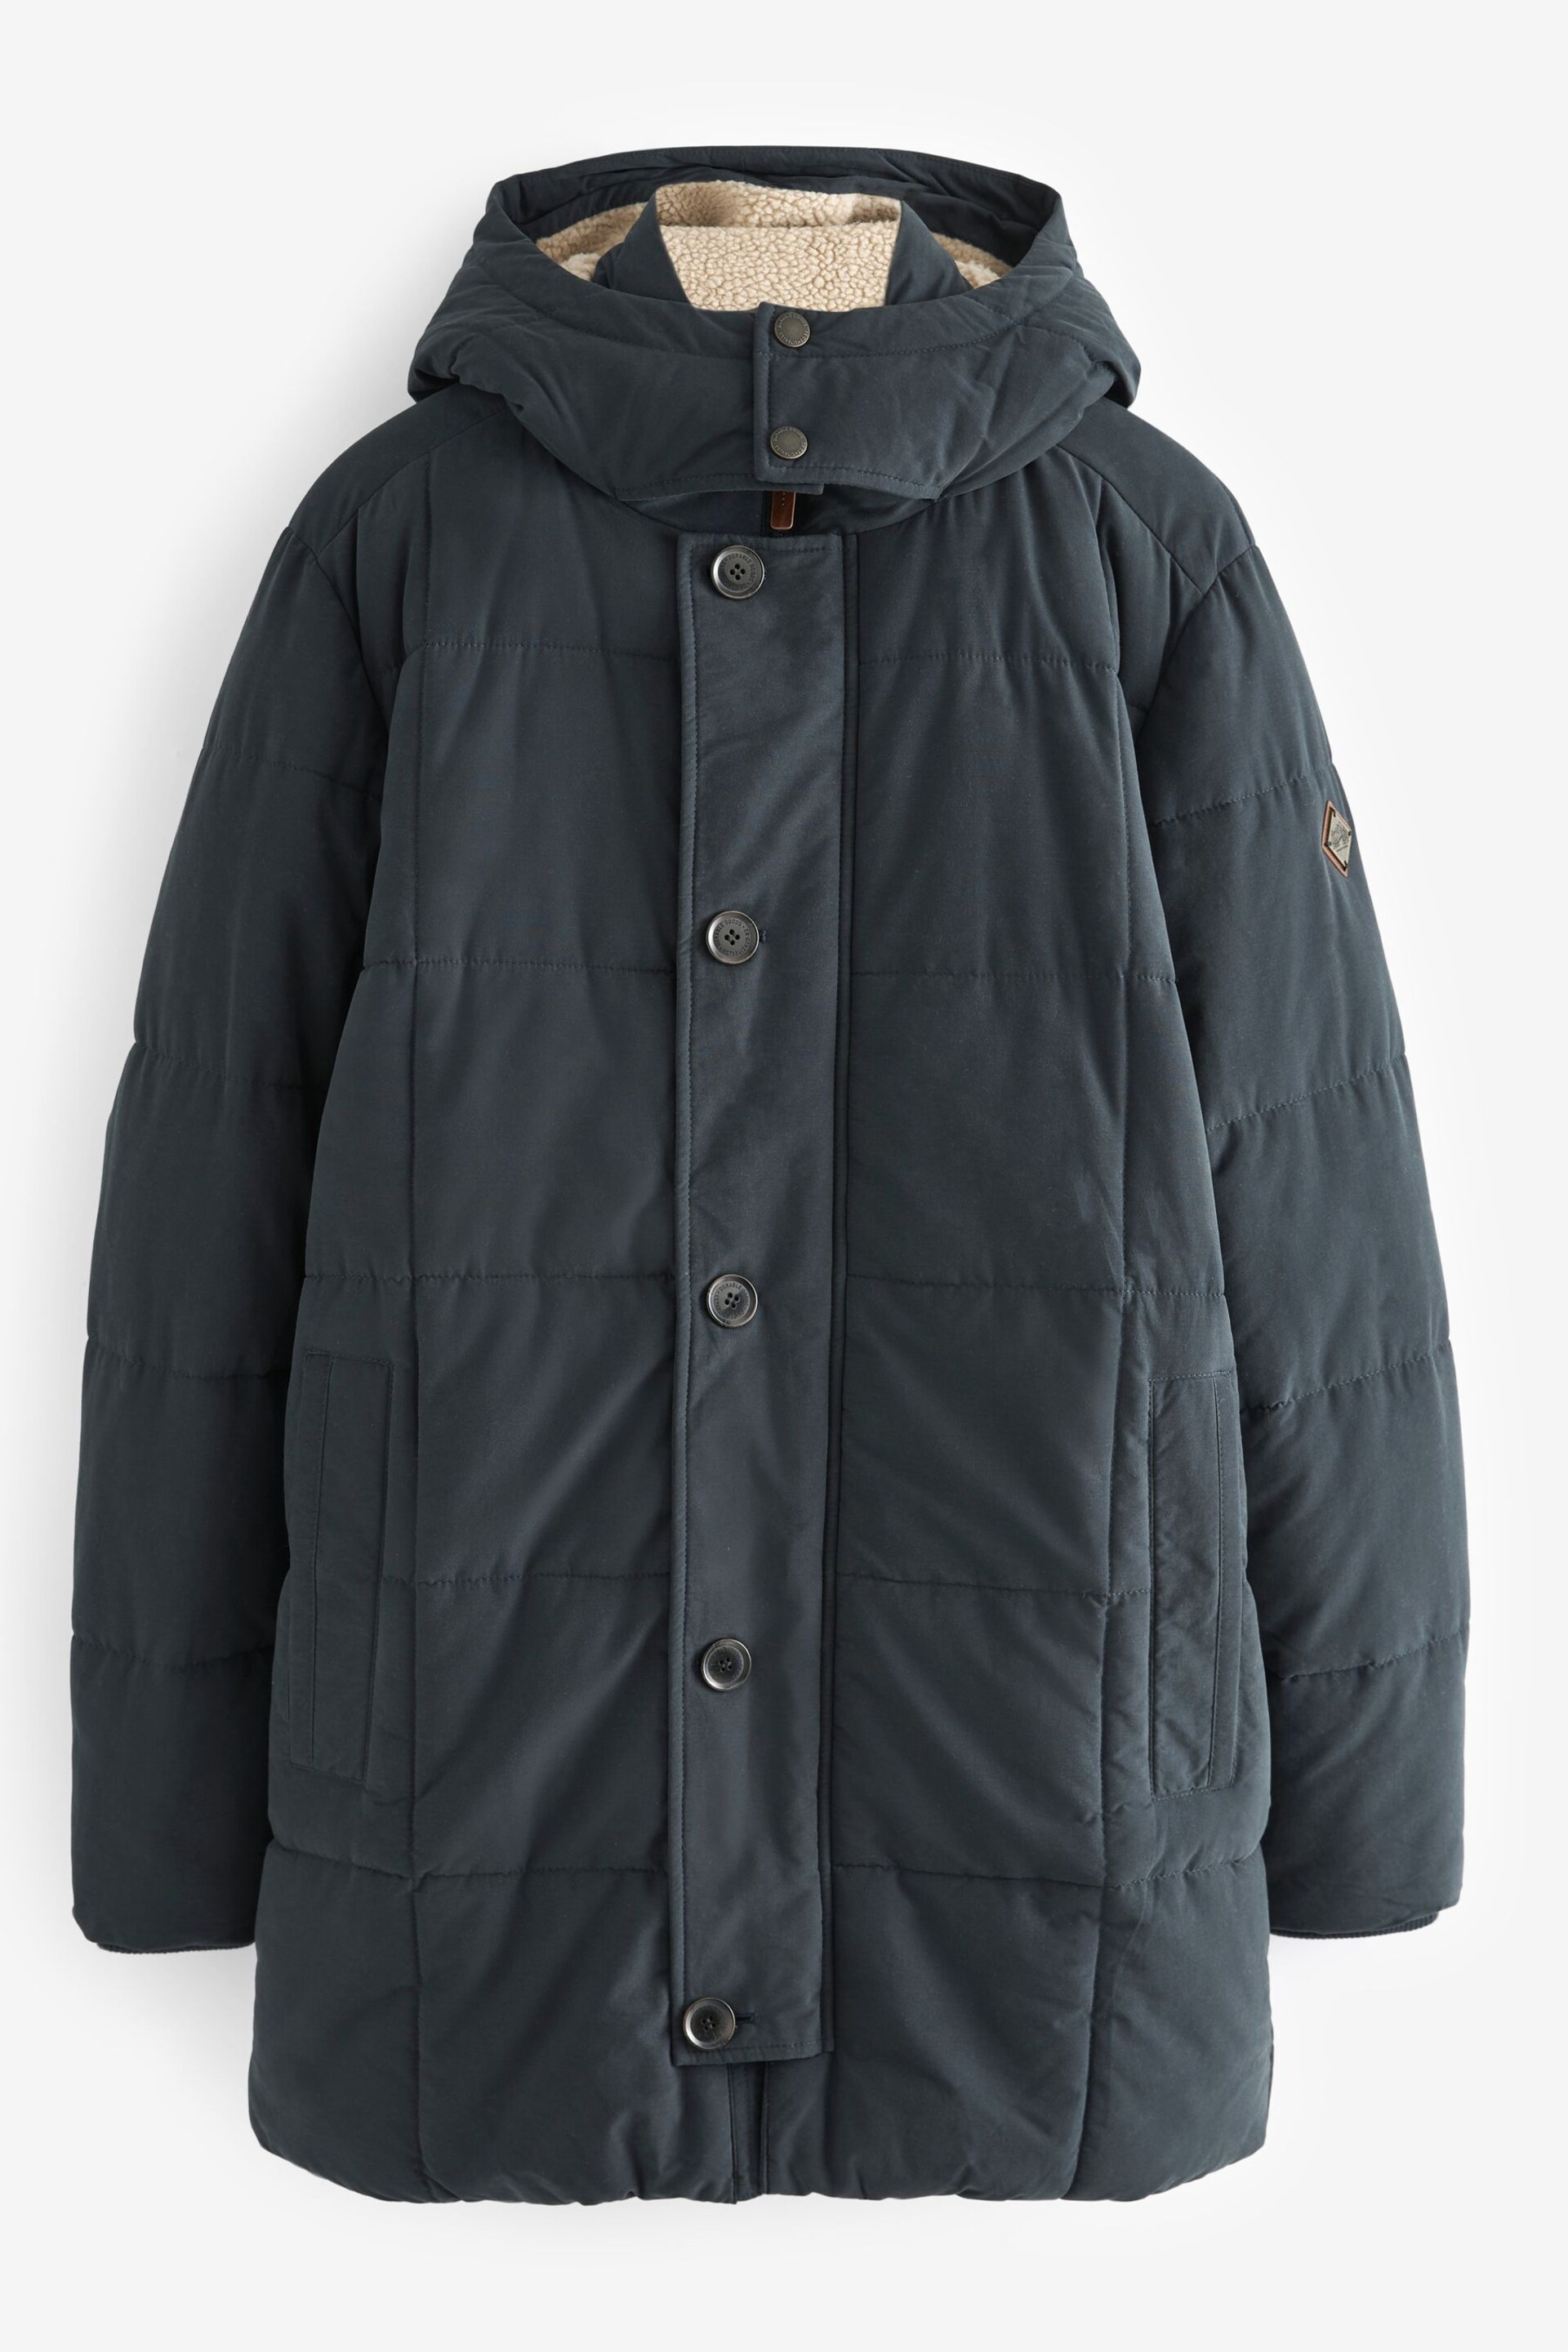 Navy Blue Square Quilted Parka Coat - Image 7 of 14